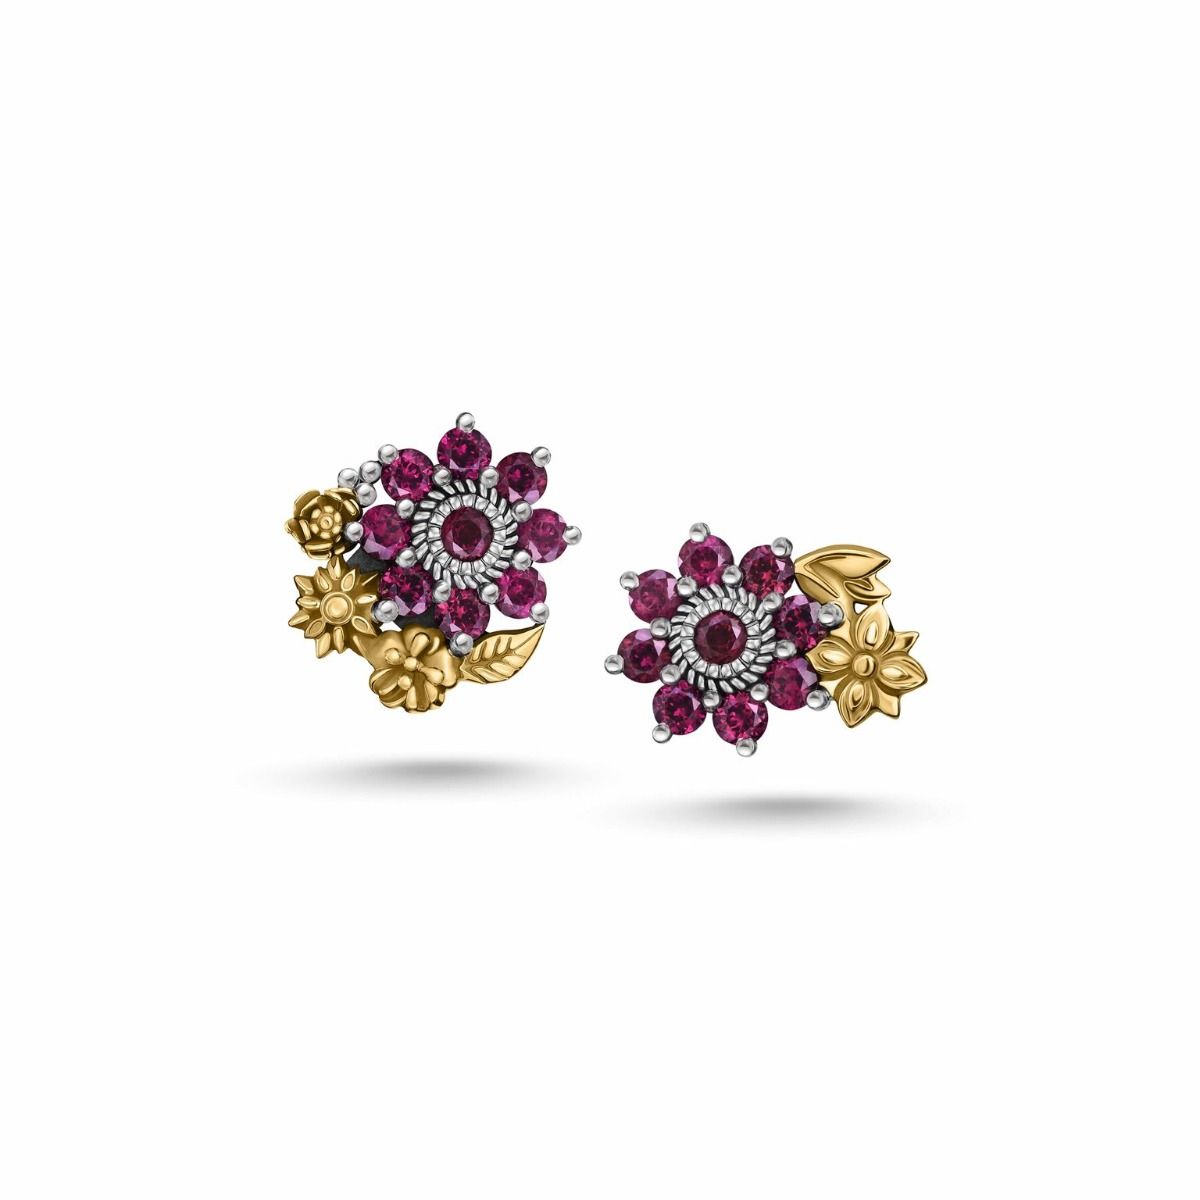 Mismatched Floral Earrings by Azza Fahmy - Designer Earrings